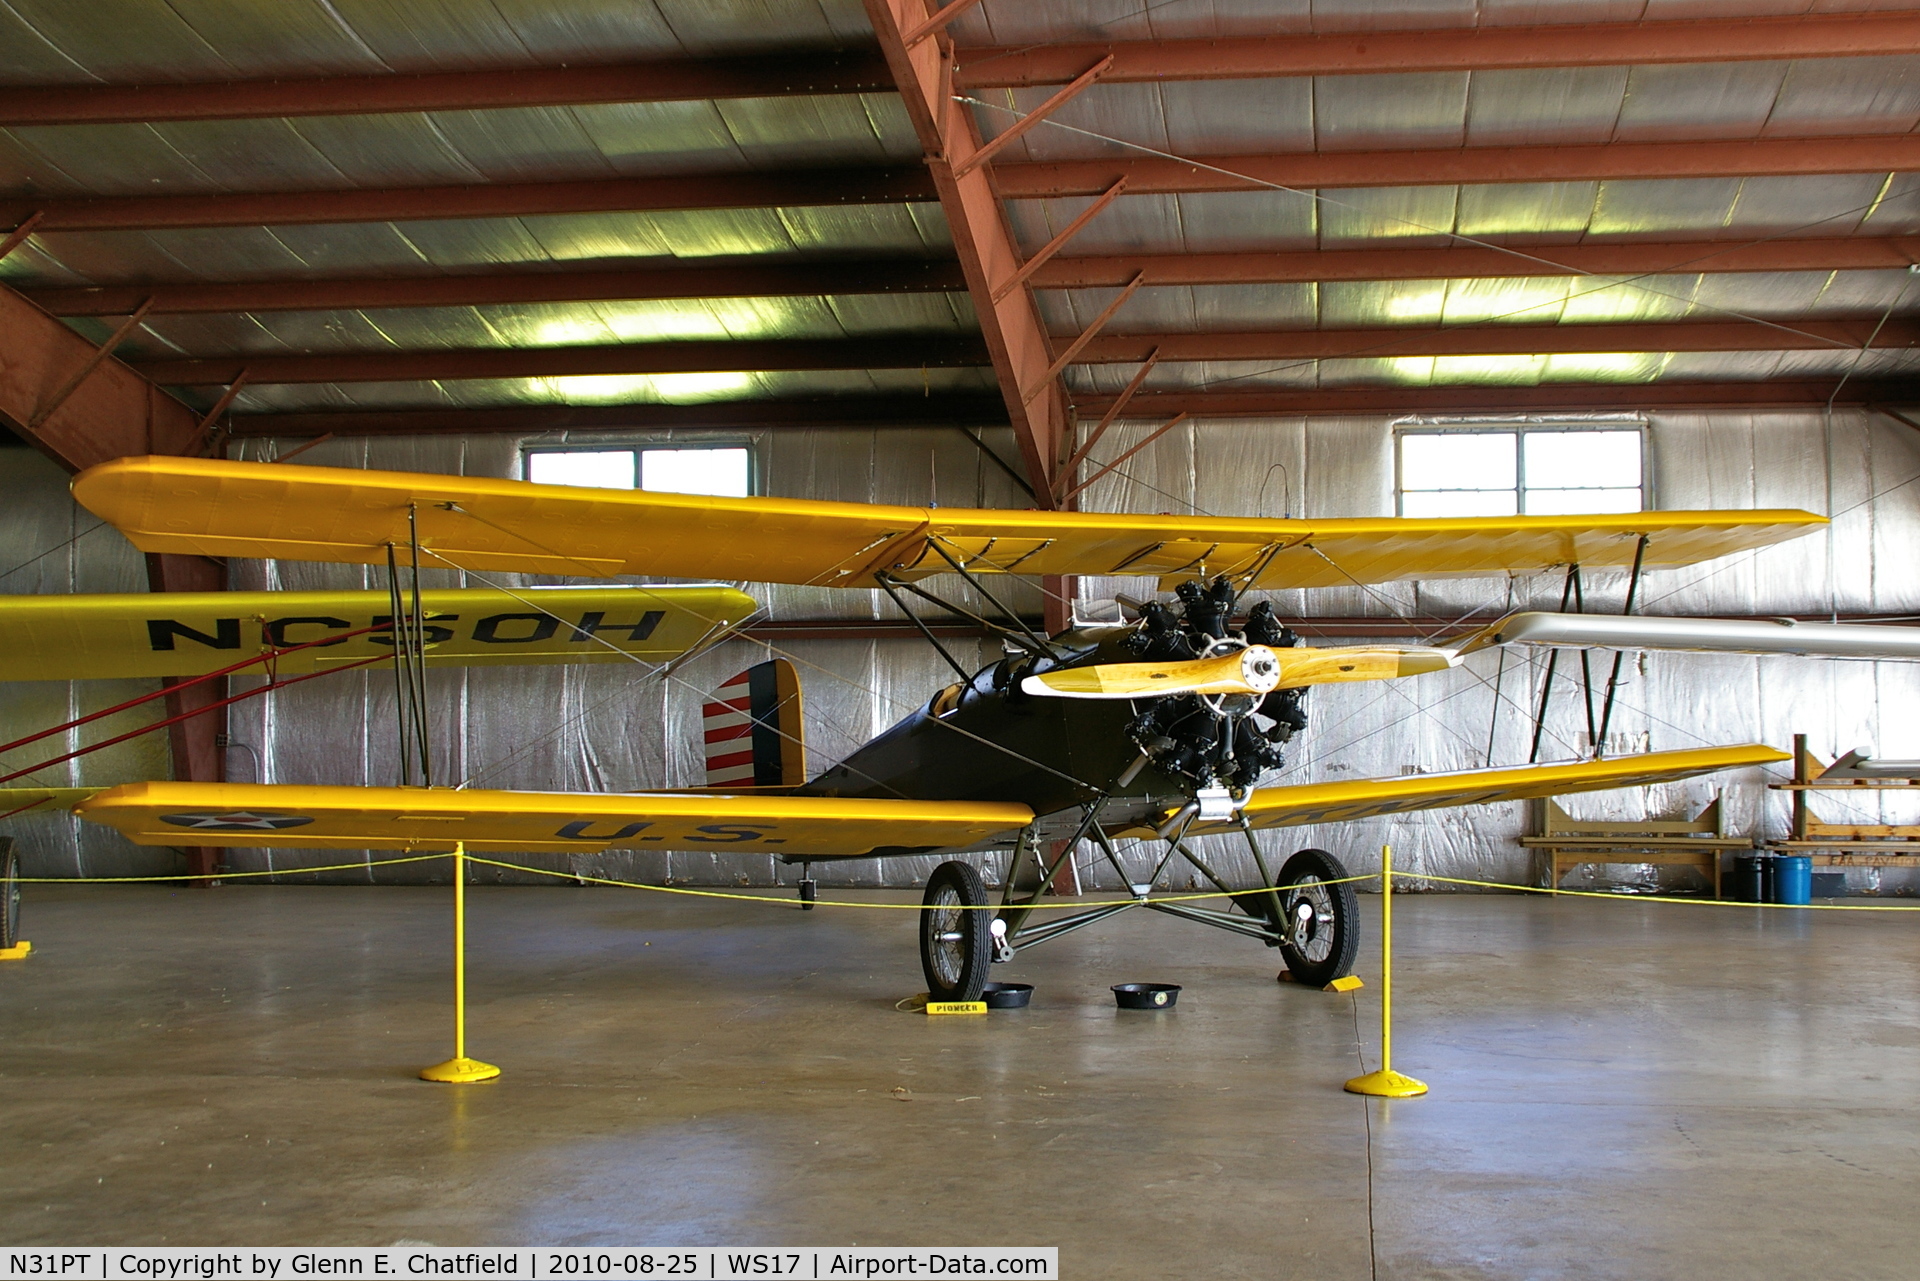 N31PT, 1998 Consolidated PT-3 Replica C/N 1, At the EAA Museum.  Replica PT-3